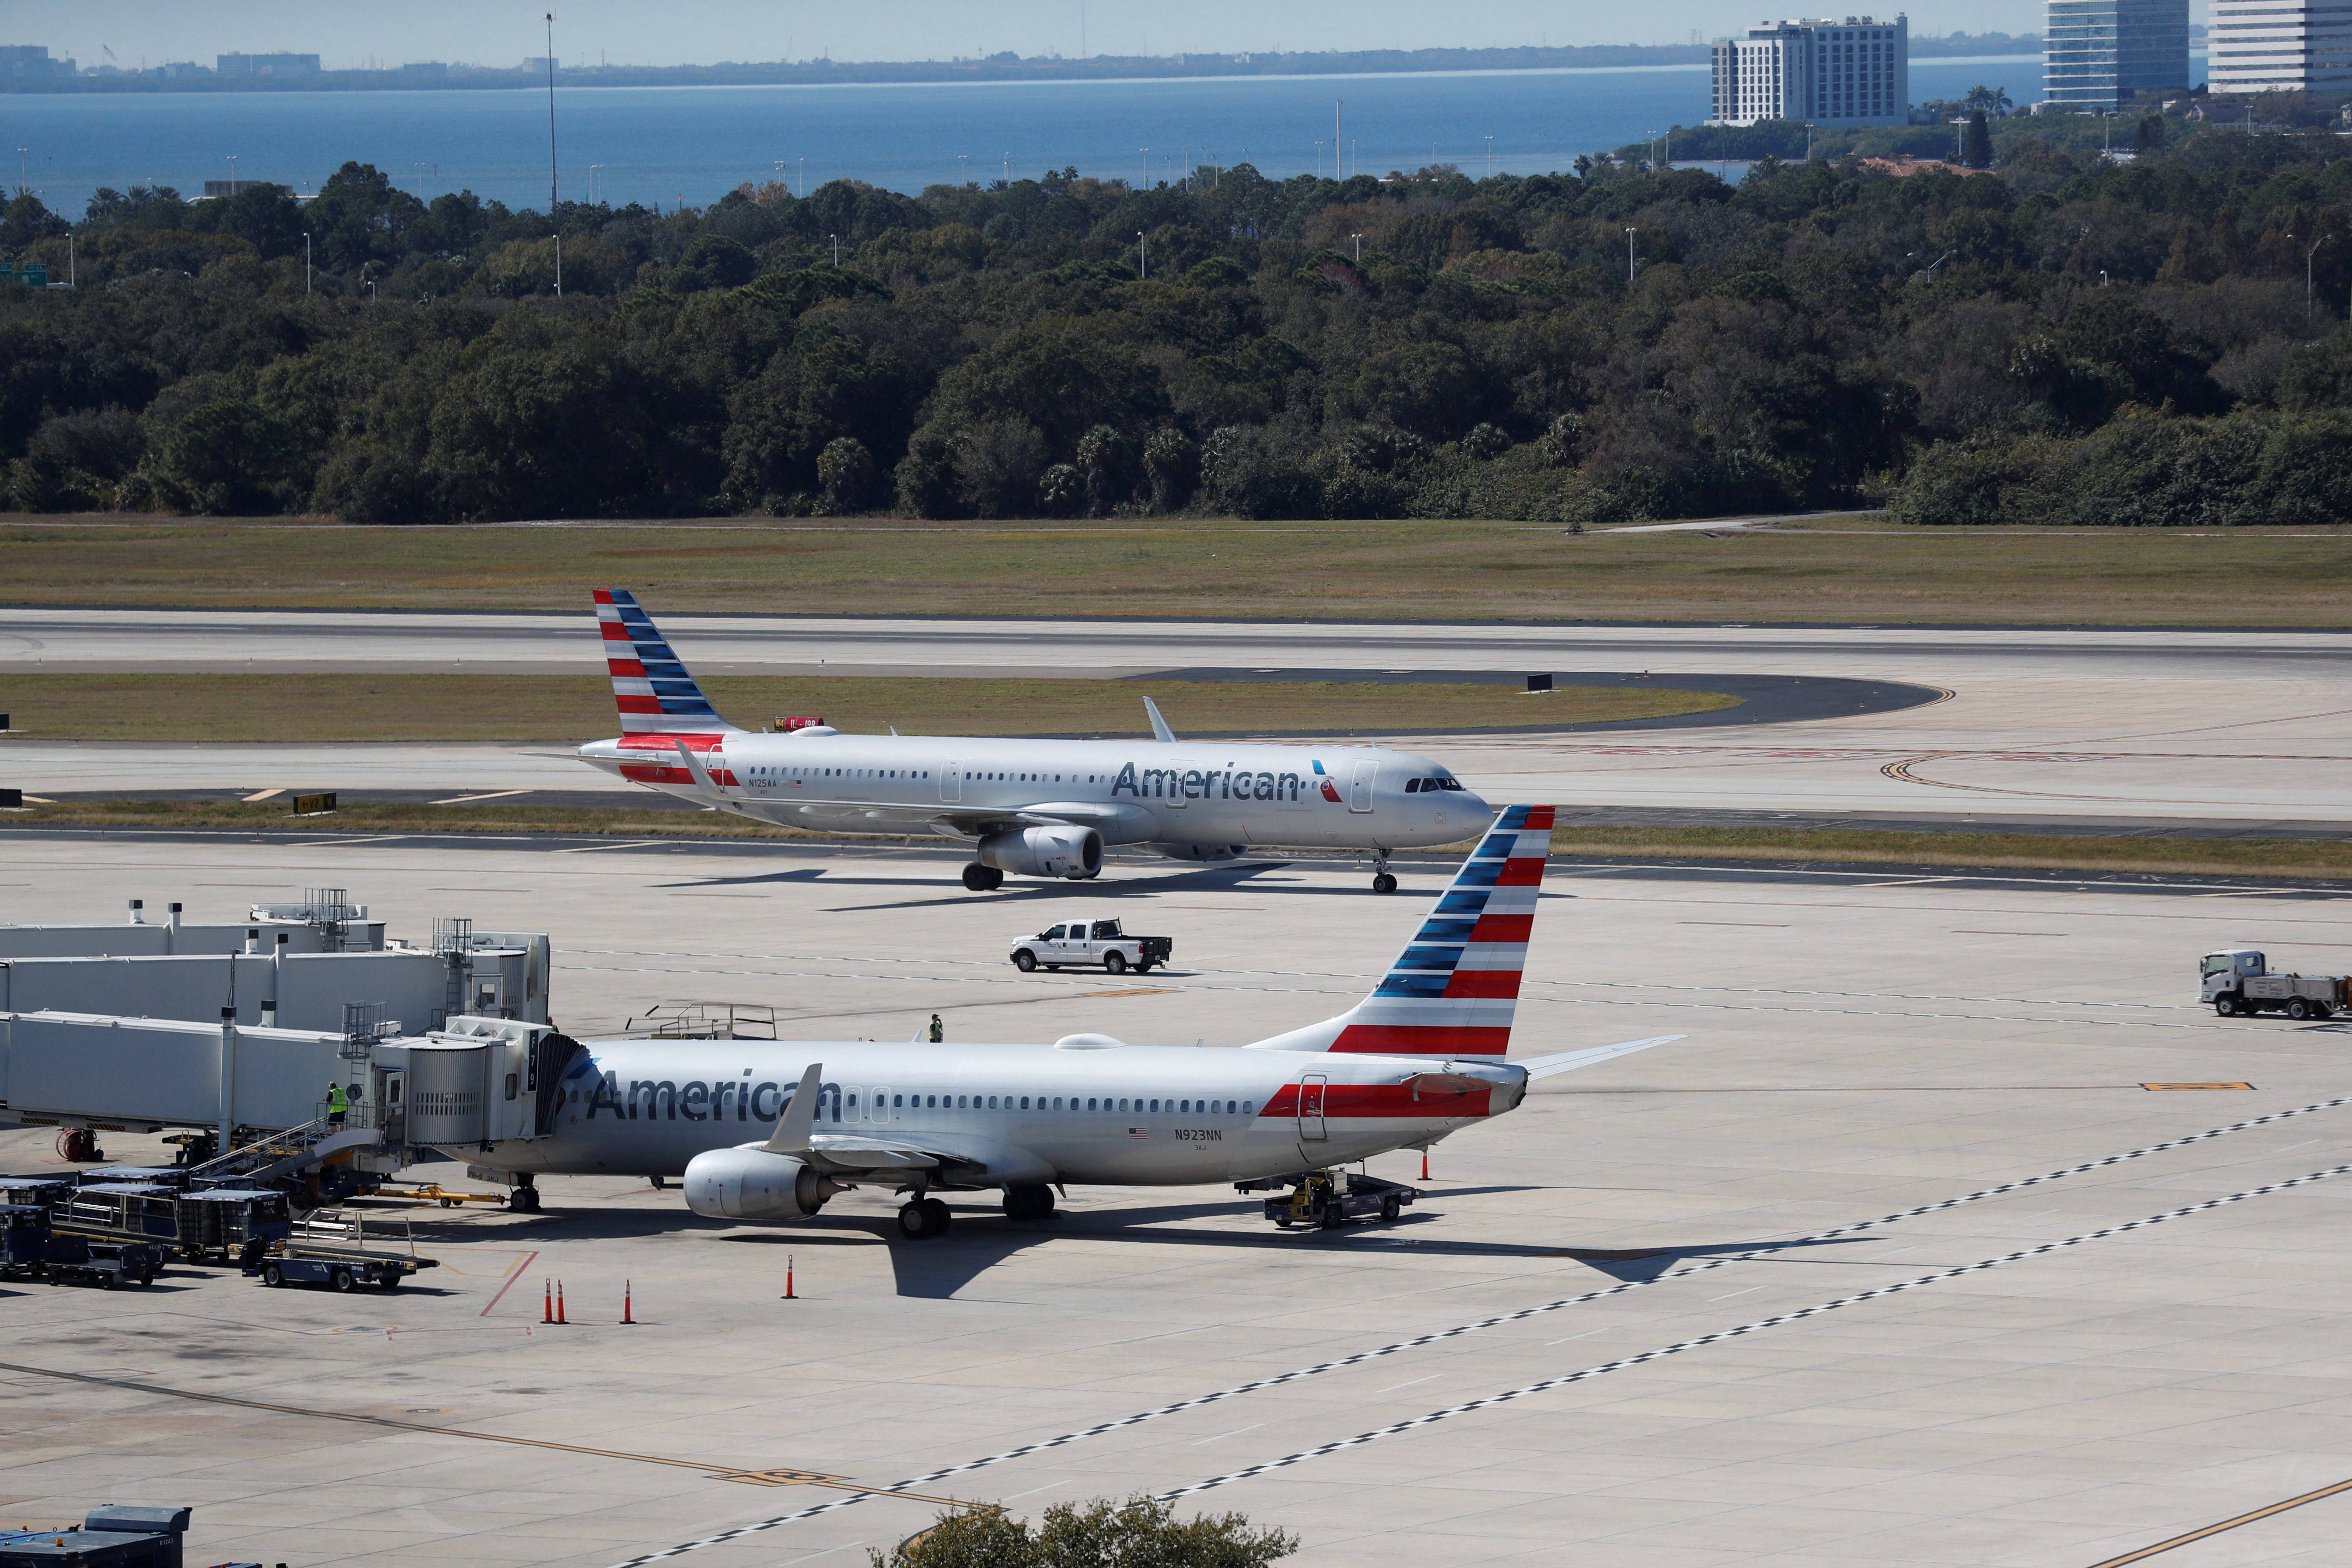 American Airlines planes are seen at the Tampa International Airport